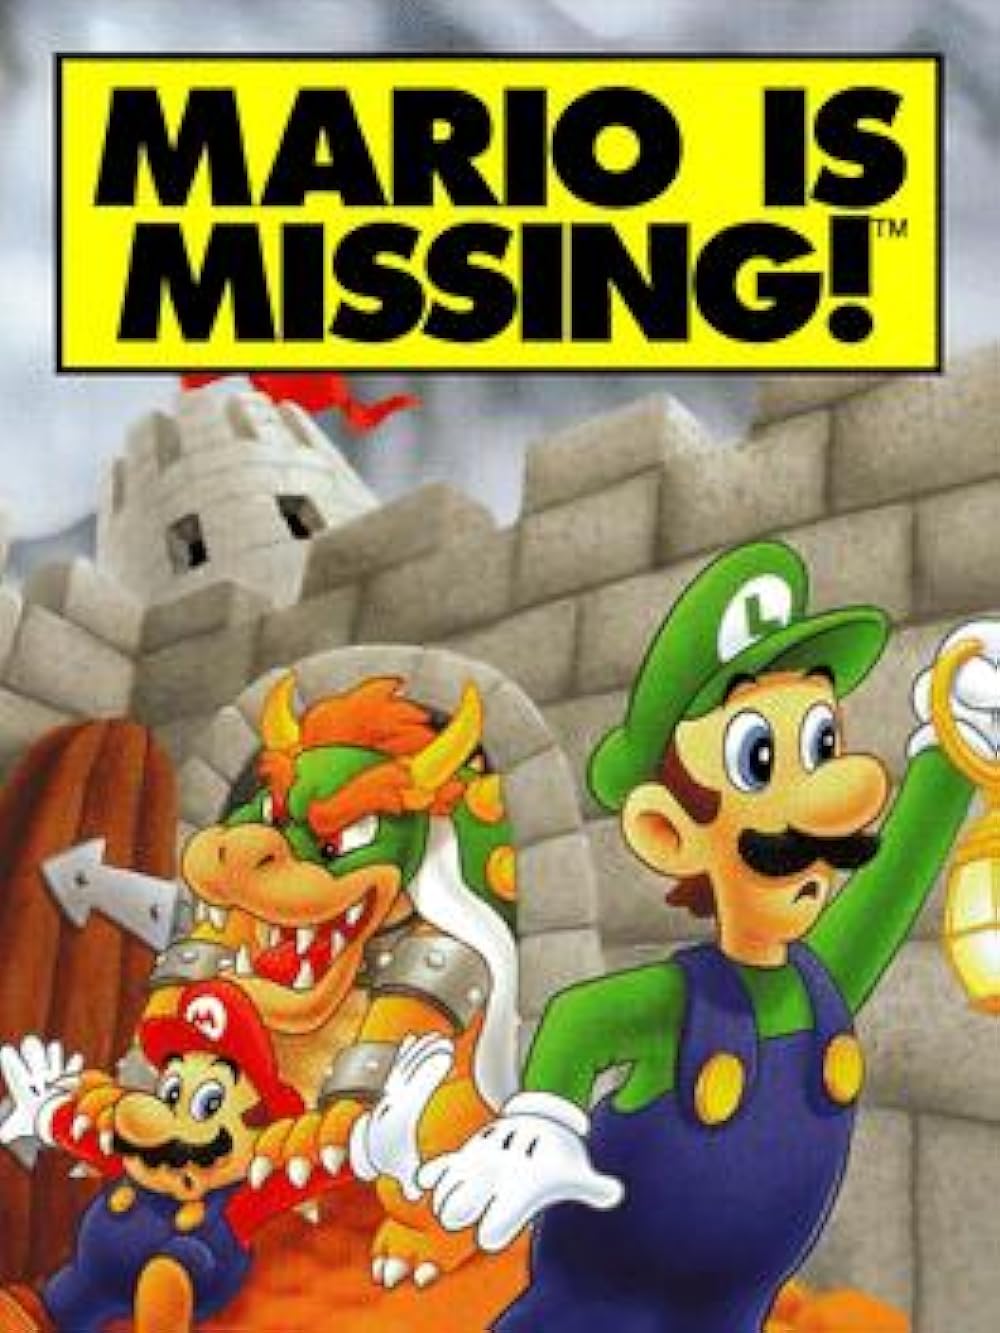 bart willemse share princess peach mario is missing photos